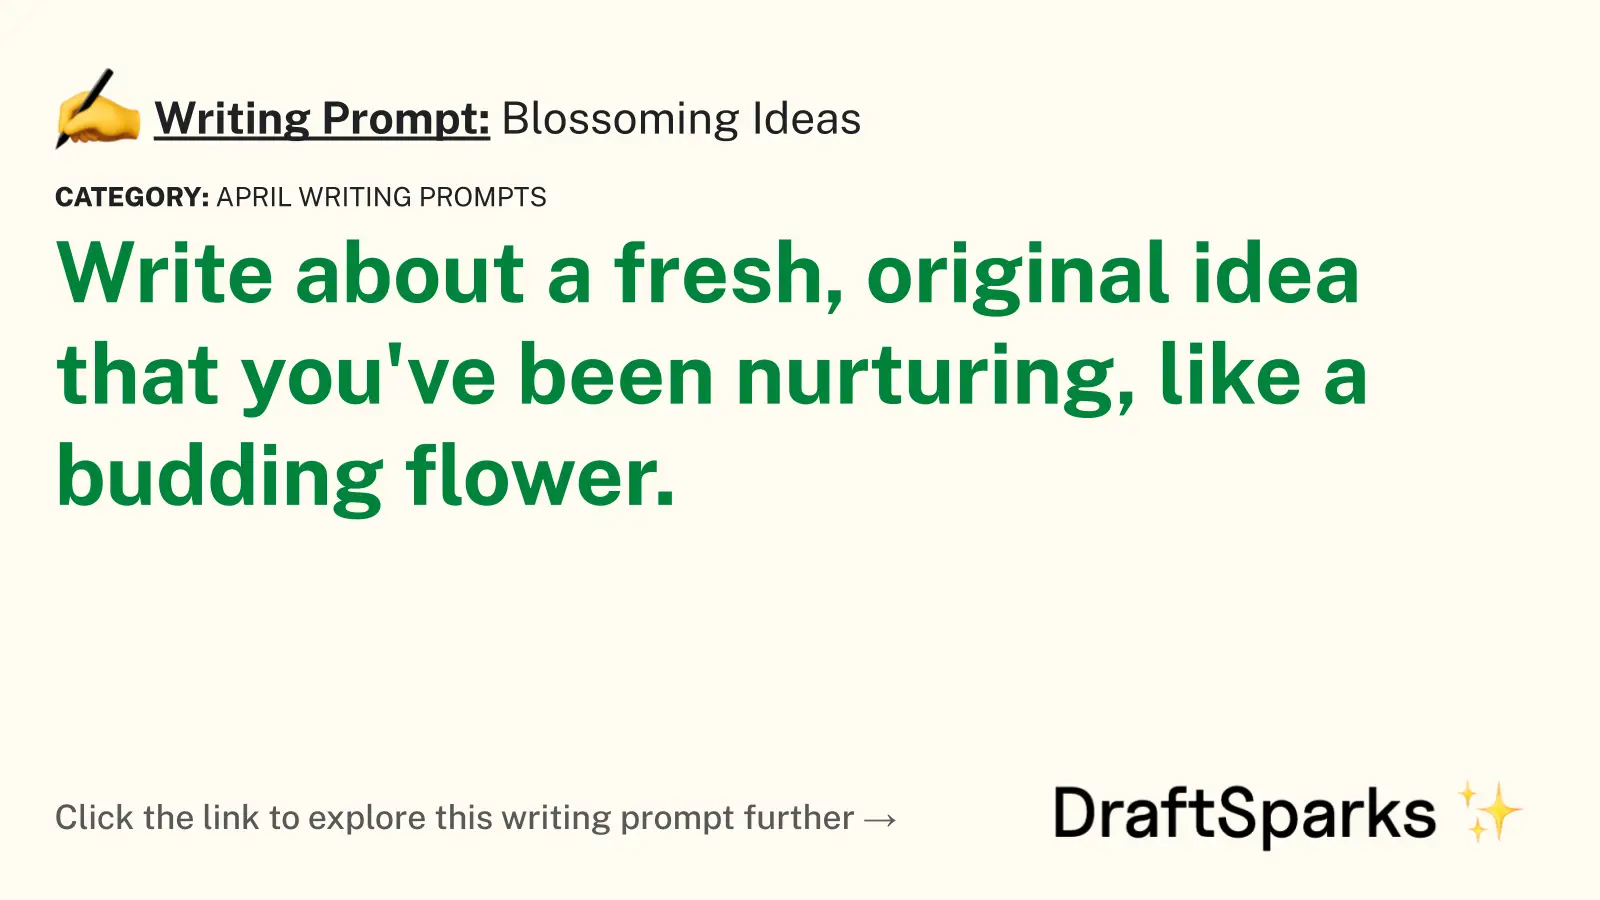 Blossoming Ideas